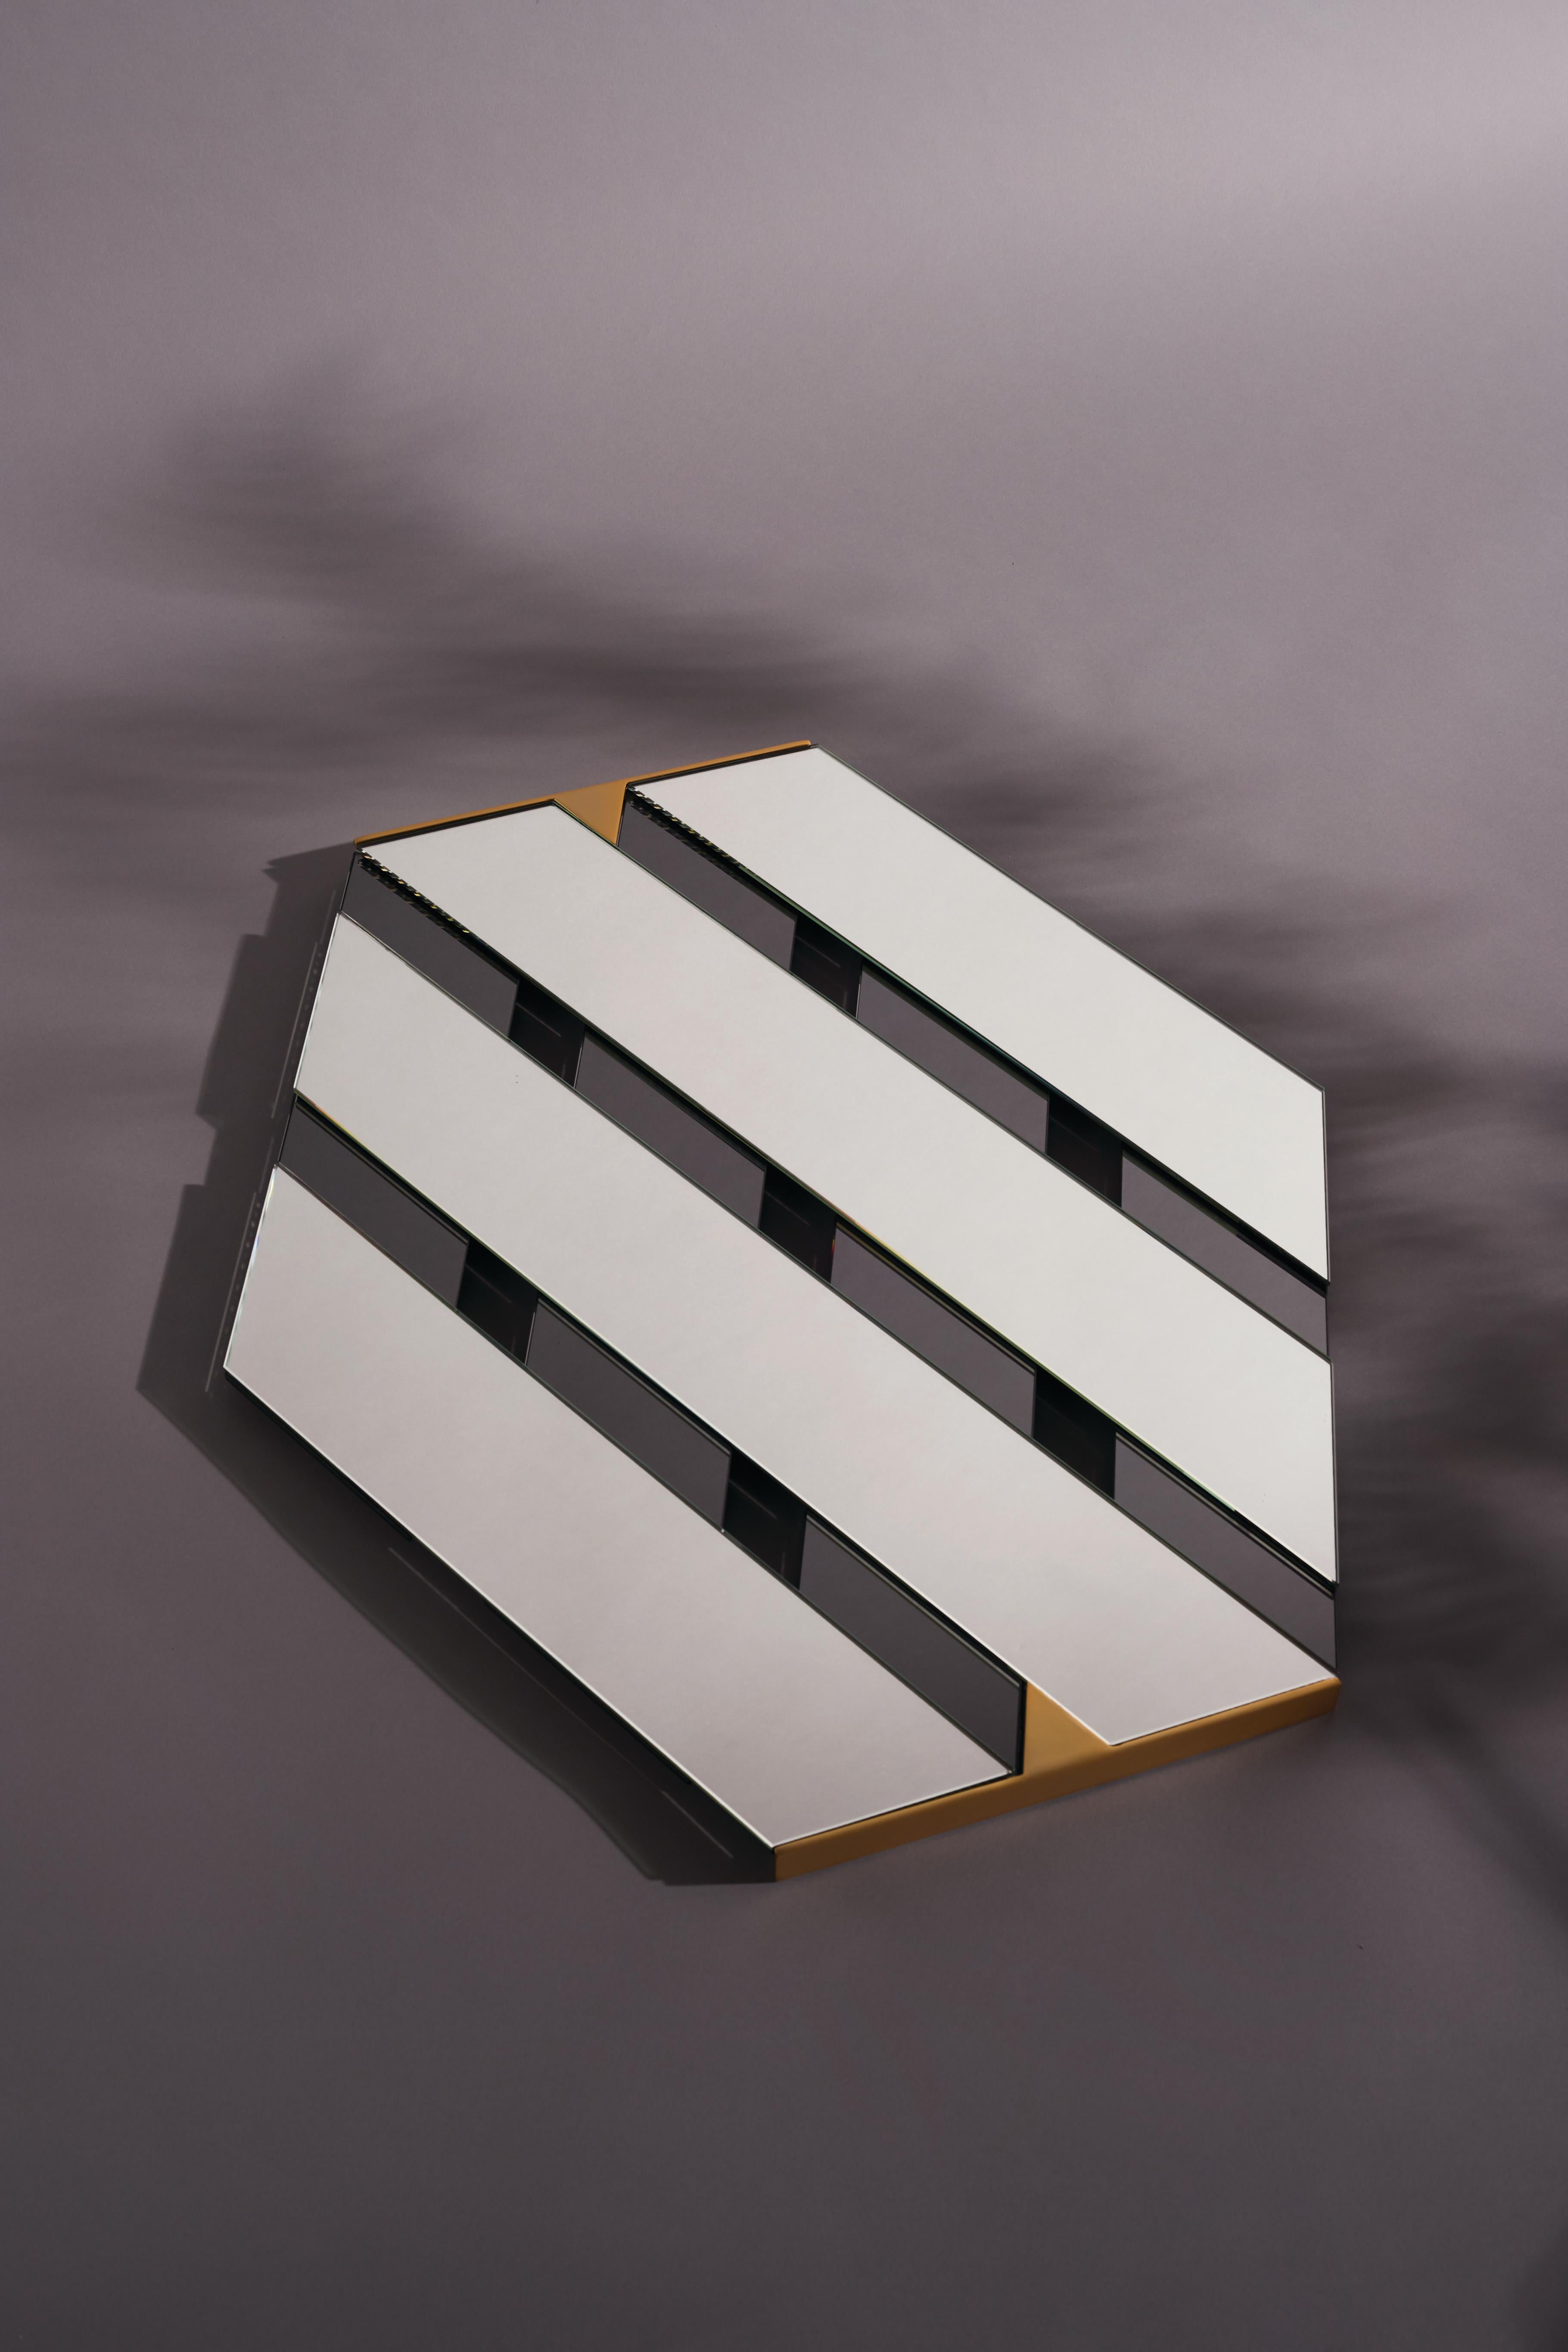 Pair of Tresse Mirrors by Mason Editions
Dimensions: 15 x 15 x 31 cm
Materials: Glass and metal

Diagonal bands of reflecting surface, which overlap in an elegant optical effect with as many bands of colored mirror: this hexagonal mirror recalls